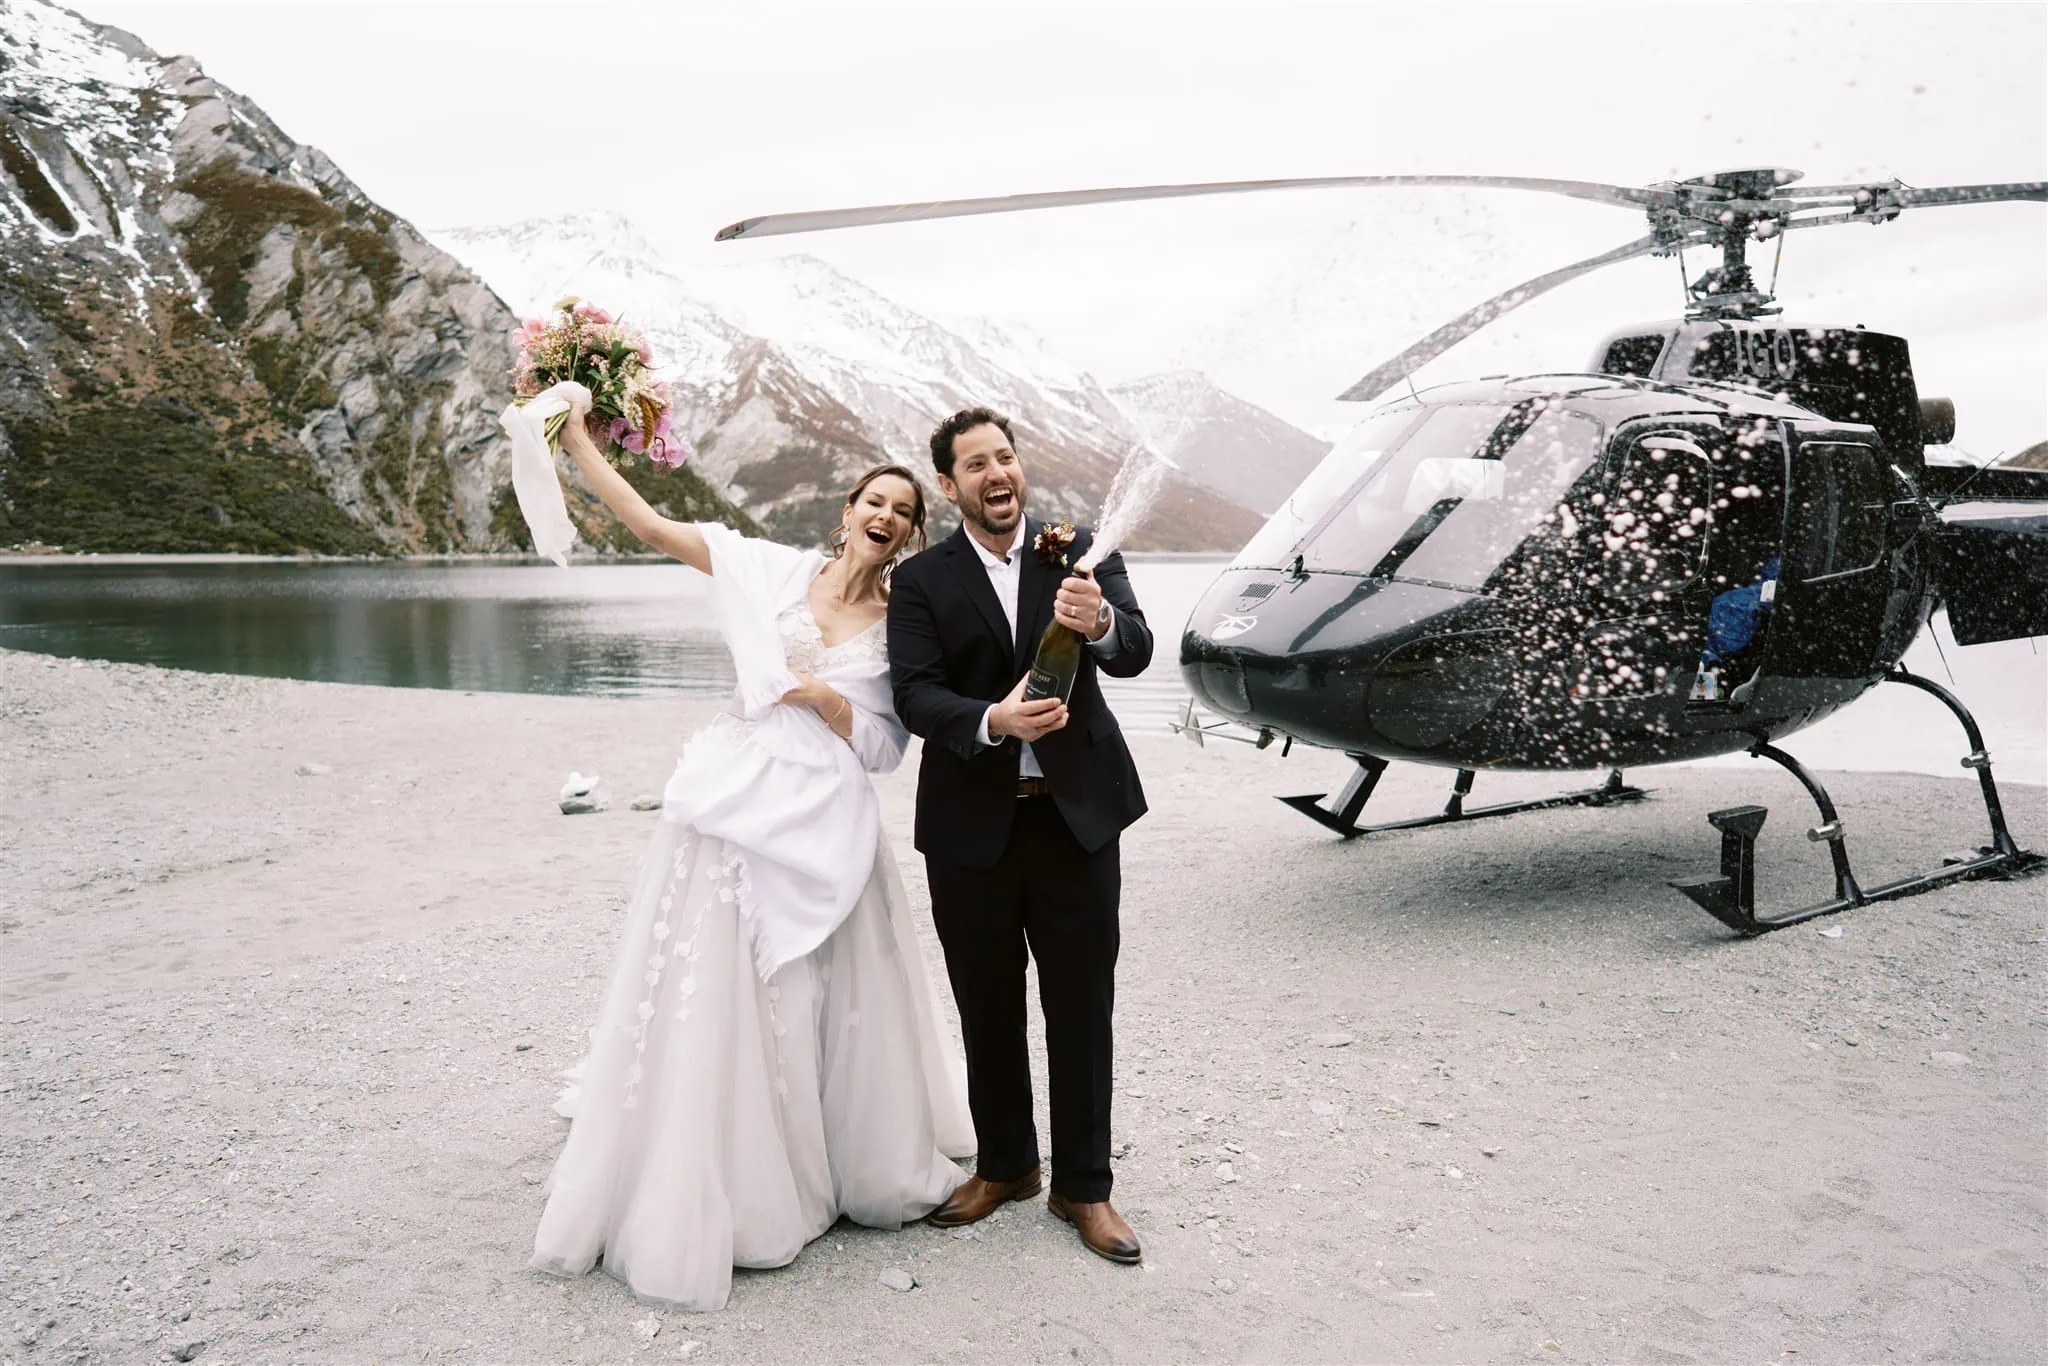 Queenstown New Zealand Elopement Wedding Photographer - Alex & Shahar, a bride and groom, pose in front of a helicopter during their Queenstown elopement.